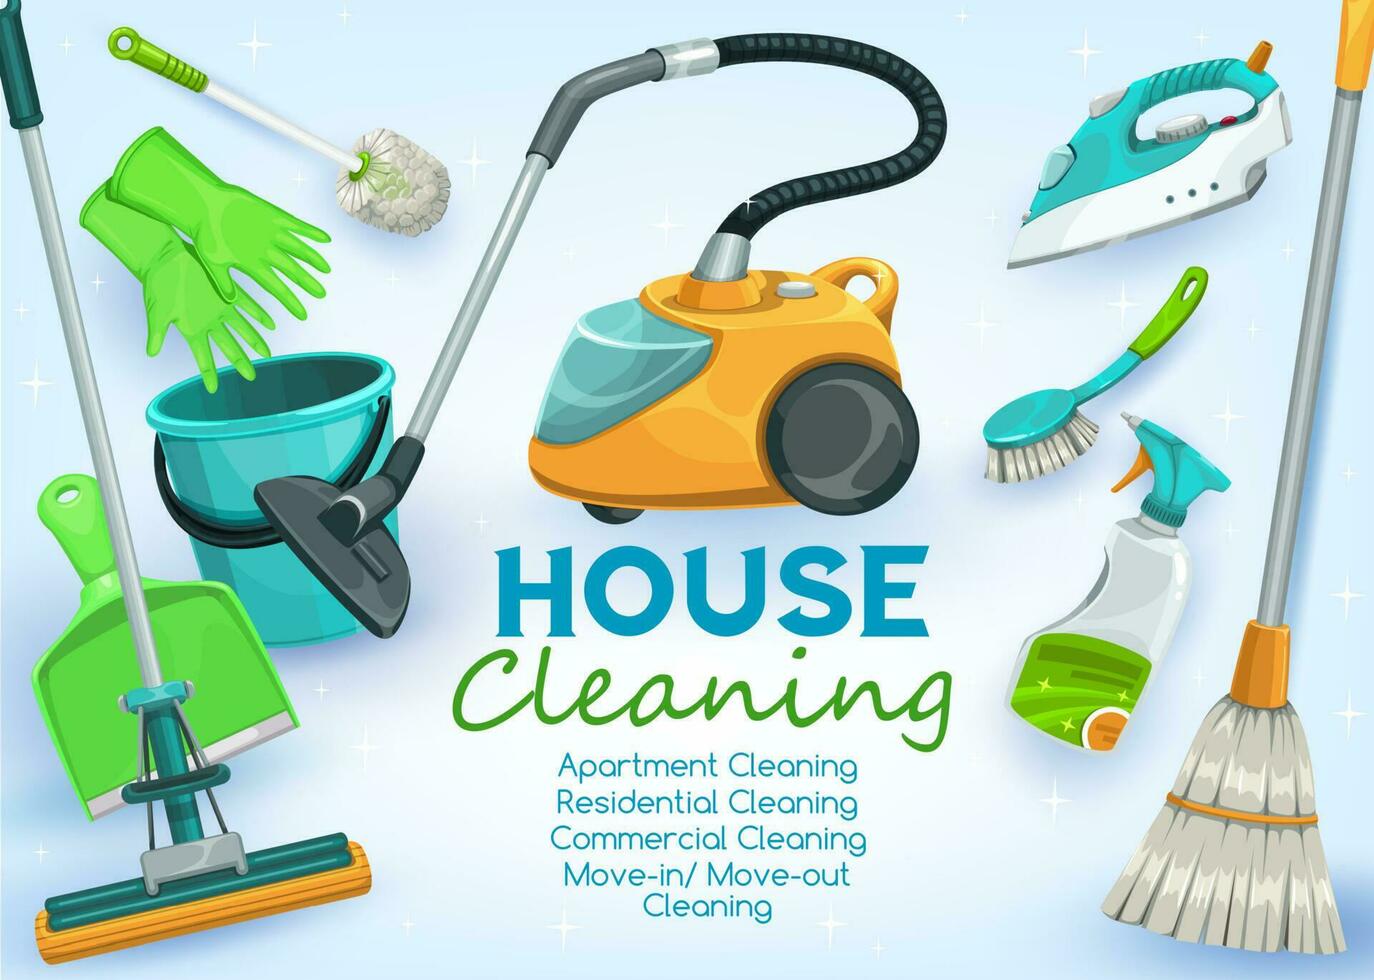 Cleaning service, house and apartments washing vector